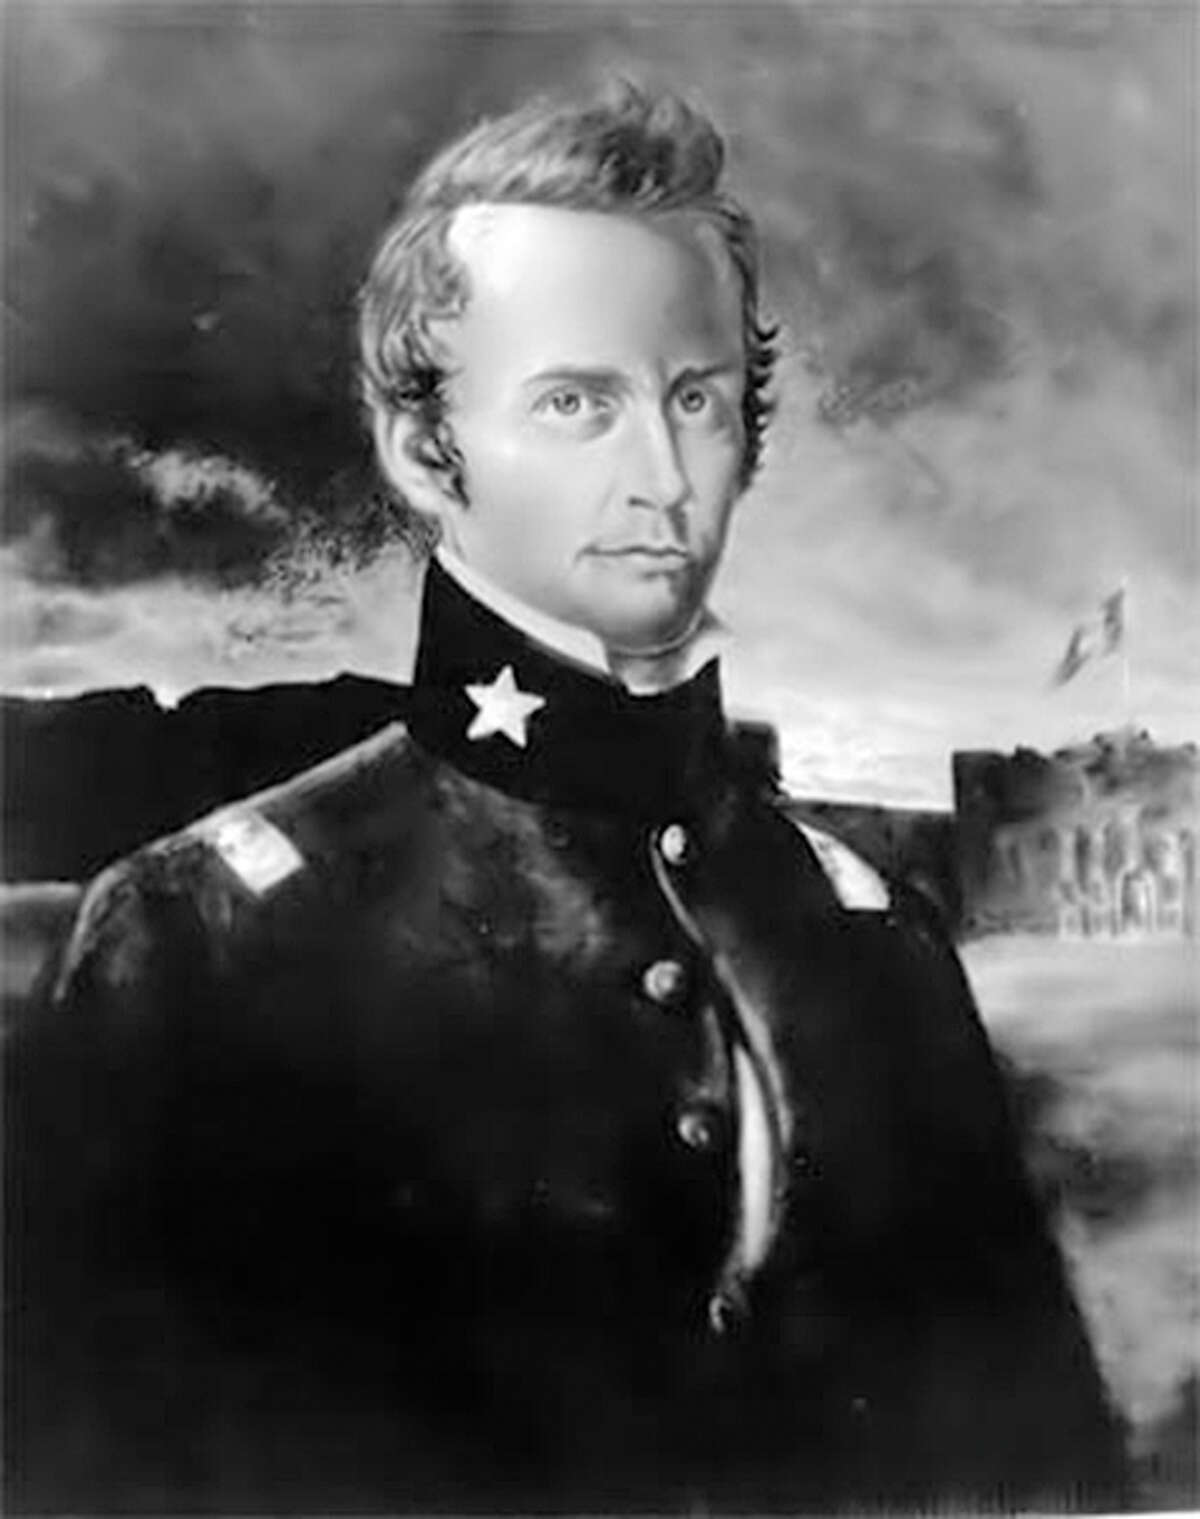 Lt. Col. William B. Travis was the commander at the Alamo during the 1836 siege.